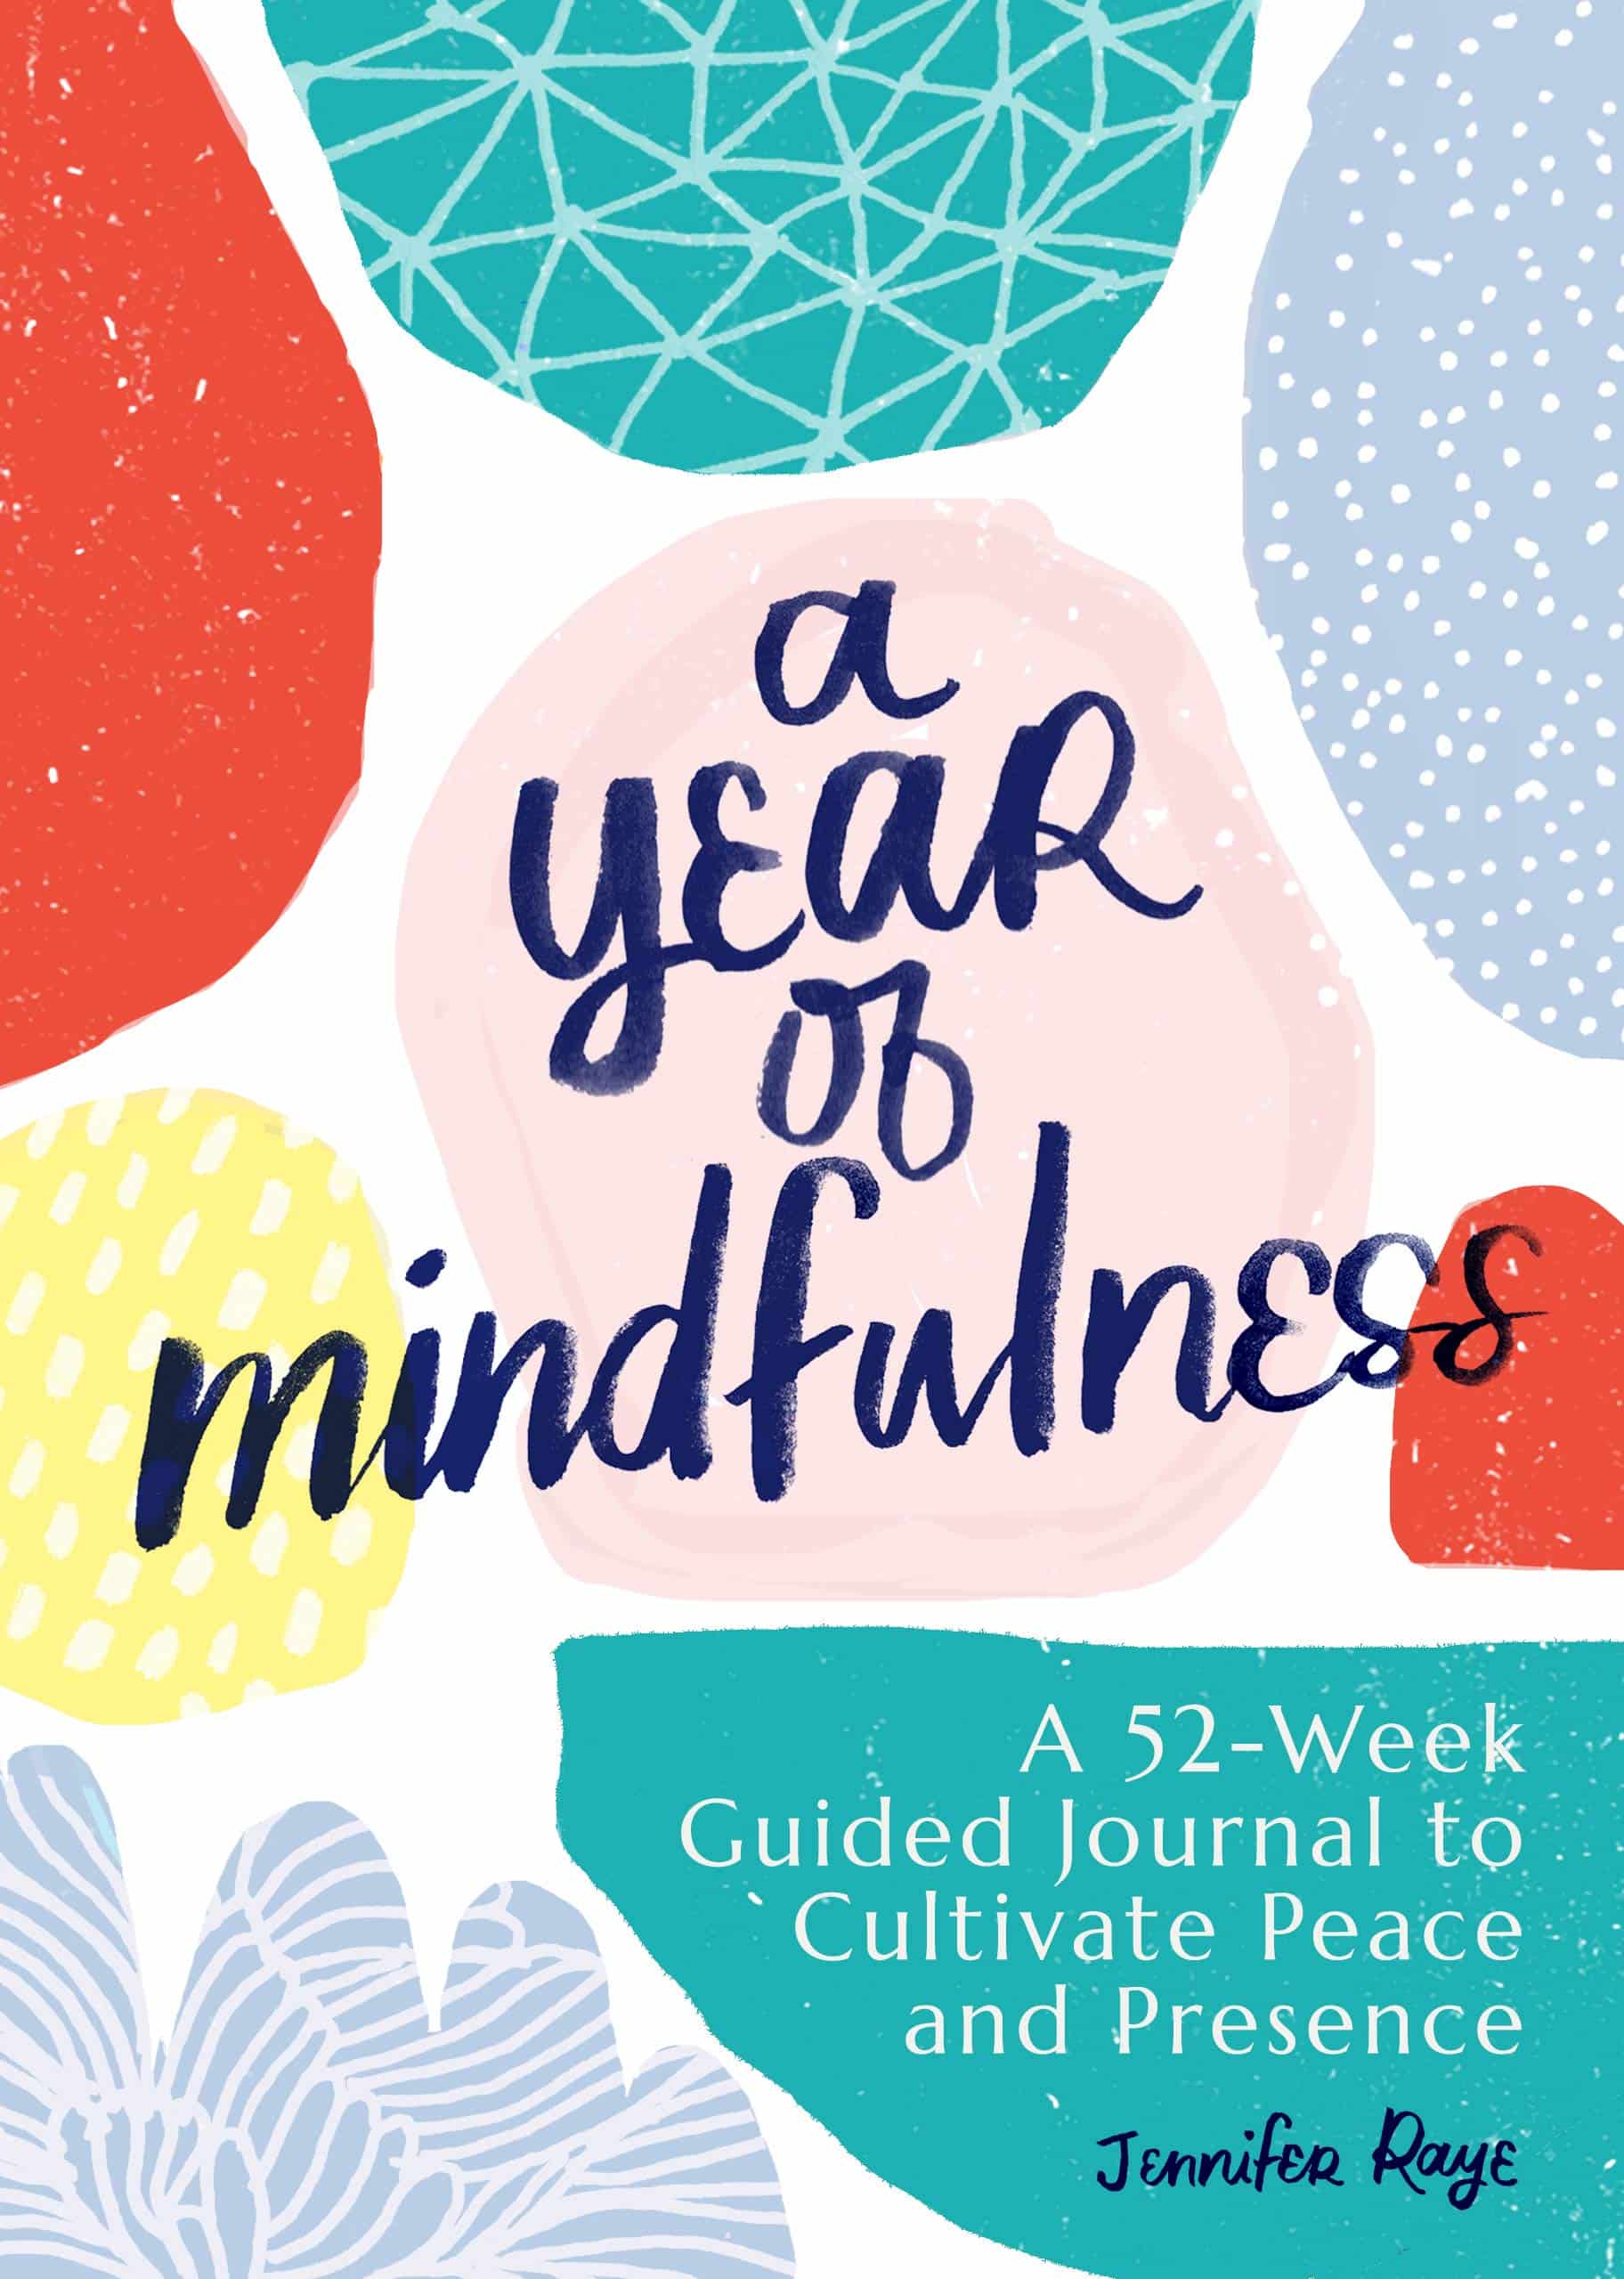 A Year of Mindfulness: A 52-Week Guided Journal to Cultivate Peace and Presence (A Year of Daily Reflections Journal)